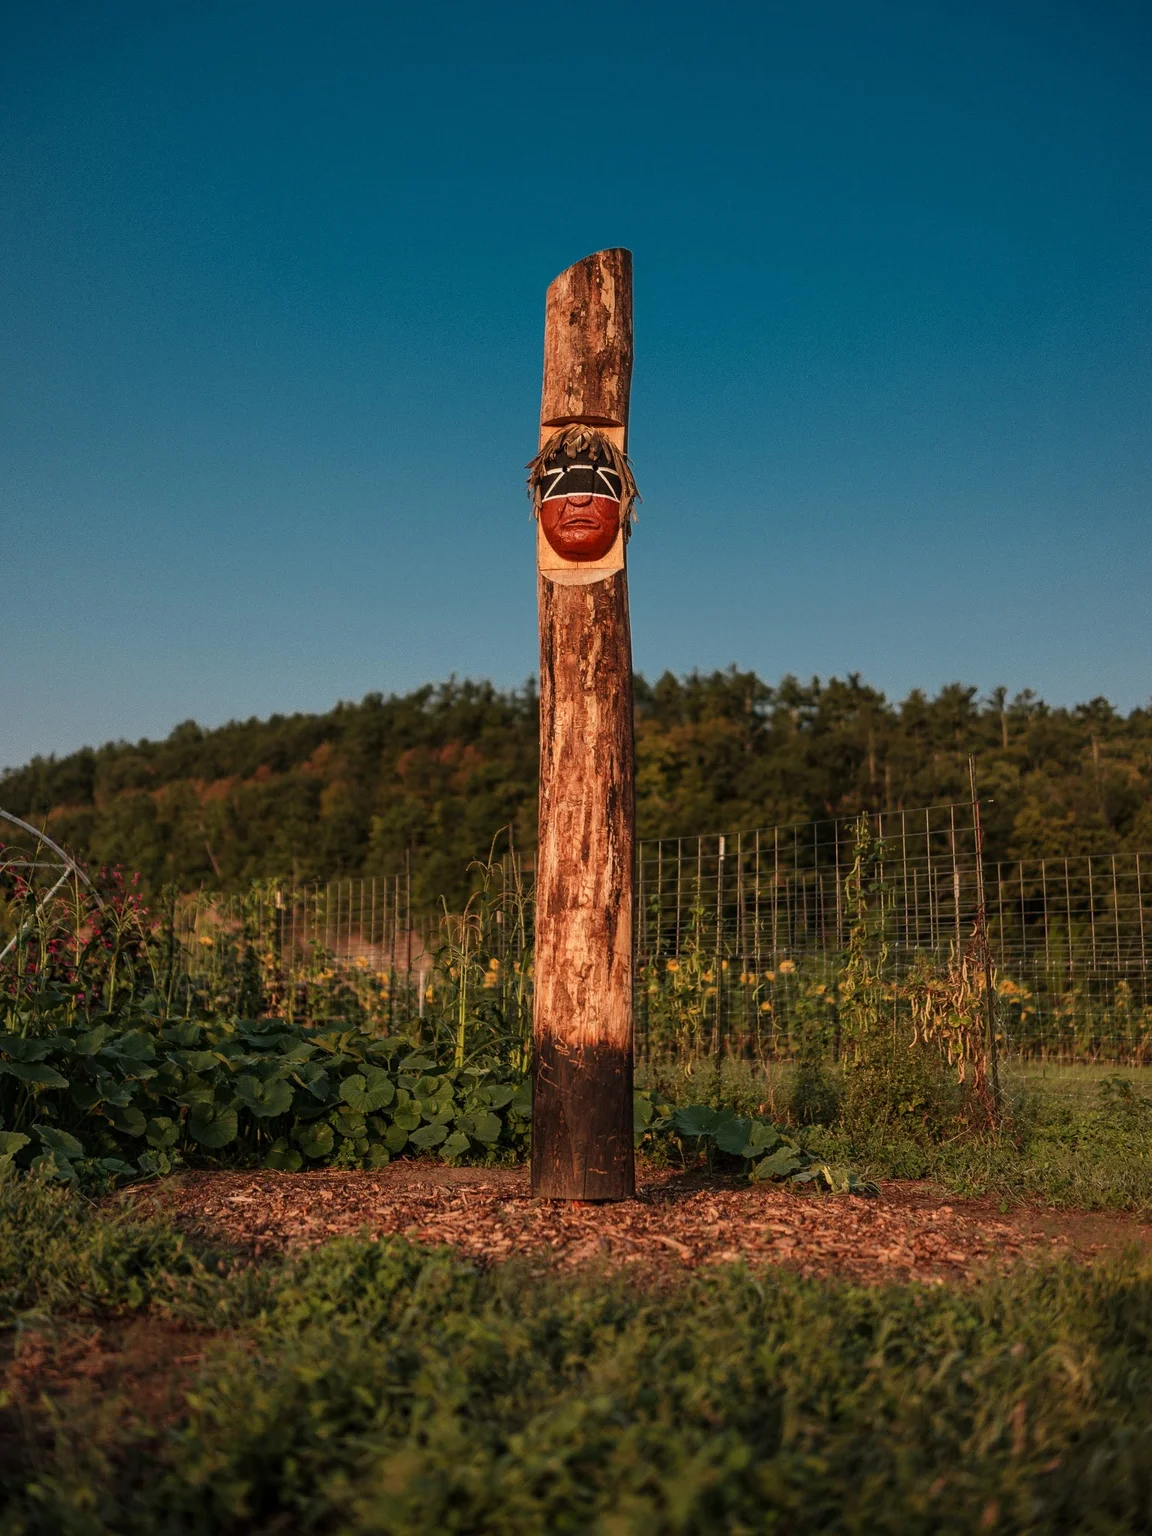 A wooden pole stands in a garden on a sunny day. The pole has a carved frowning face that is painted red and has a back strike covering the eyes with straw as hair. Behind the pole, there is a fence, then a forested mountain further in the background.